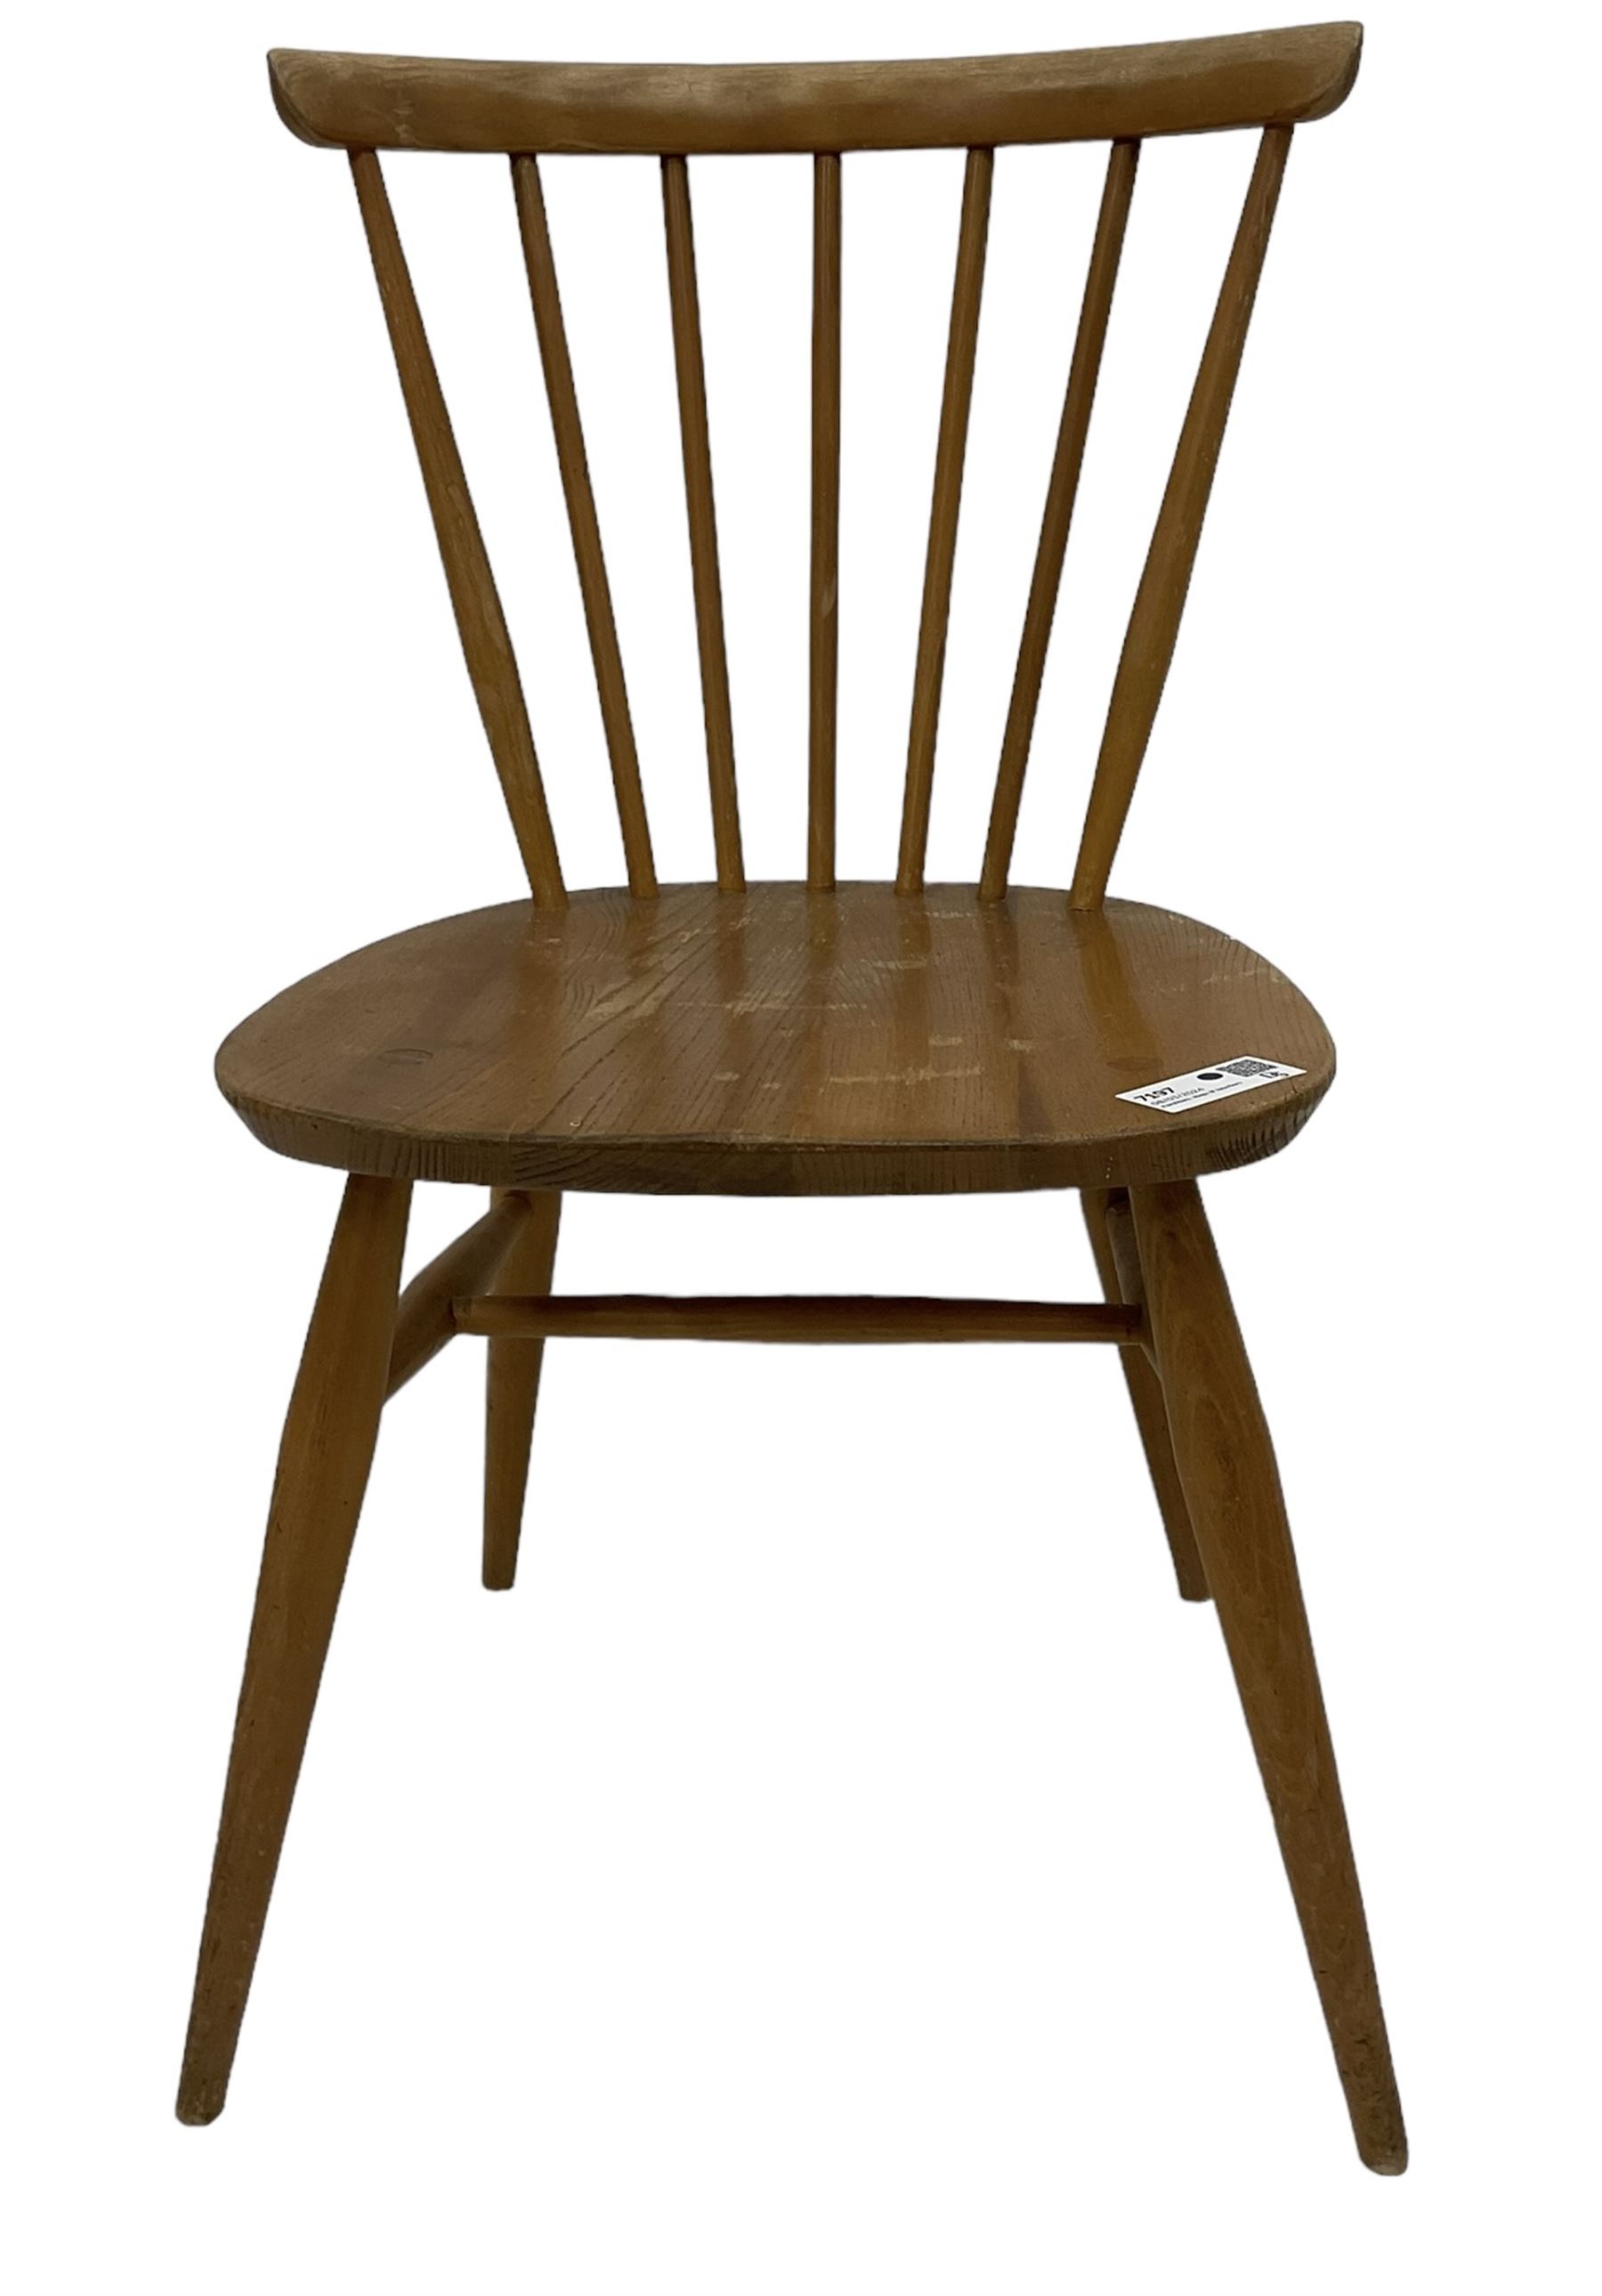 Ercol - 1960s set of three elm stick back chairs - Image 6 of 9